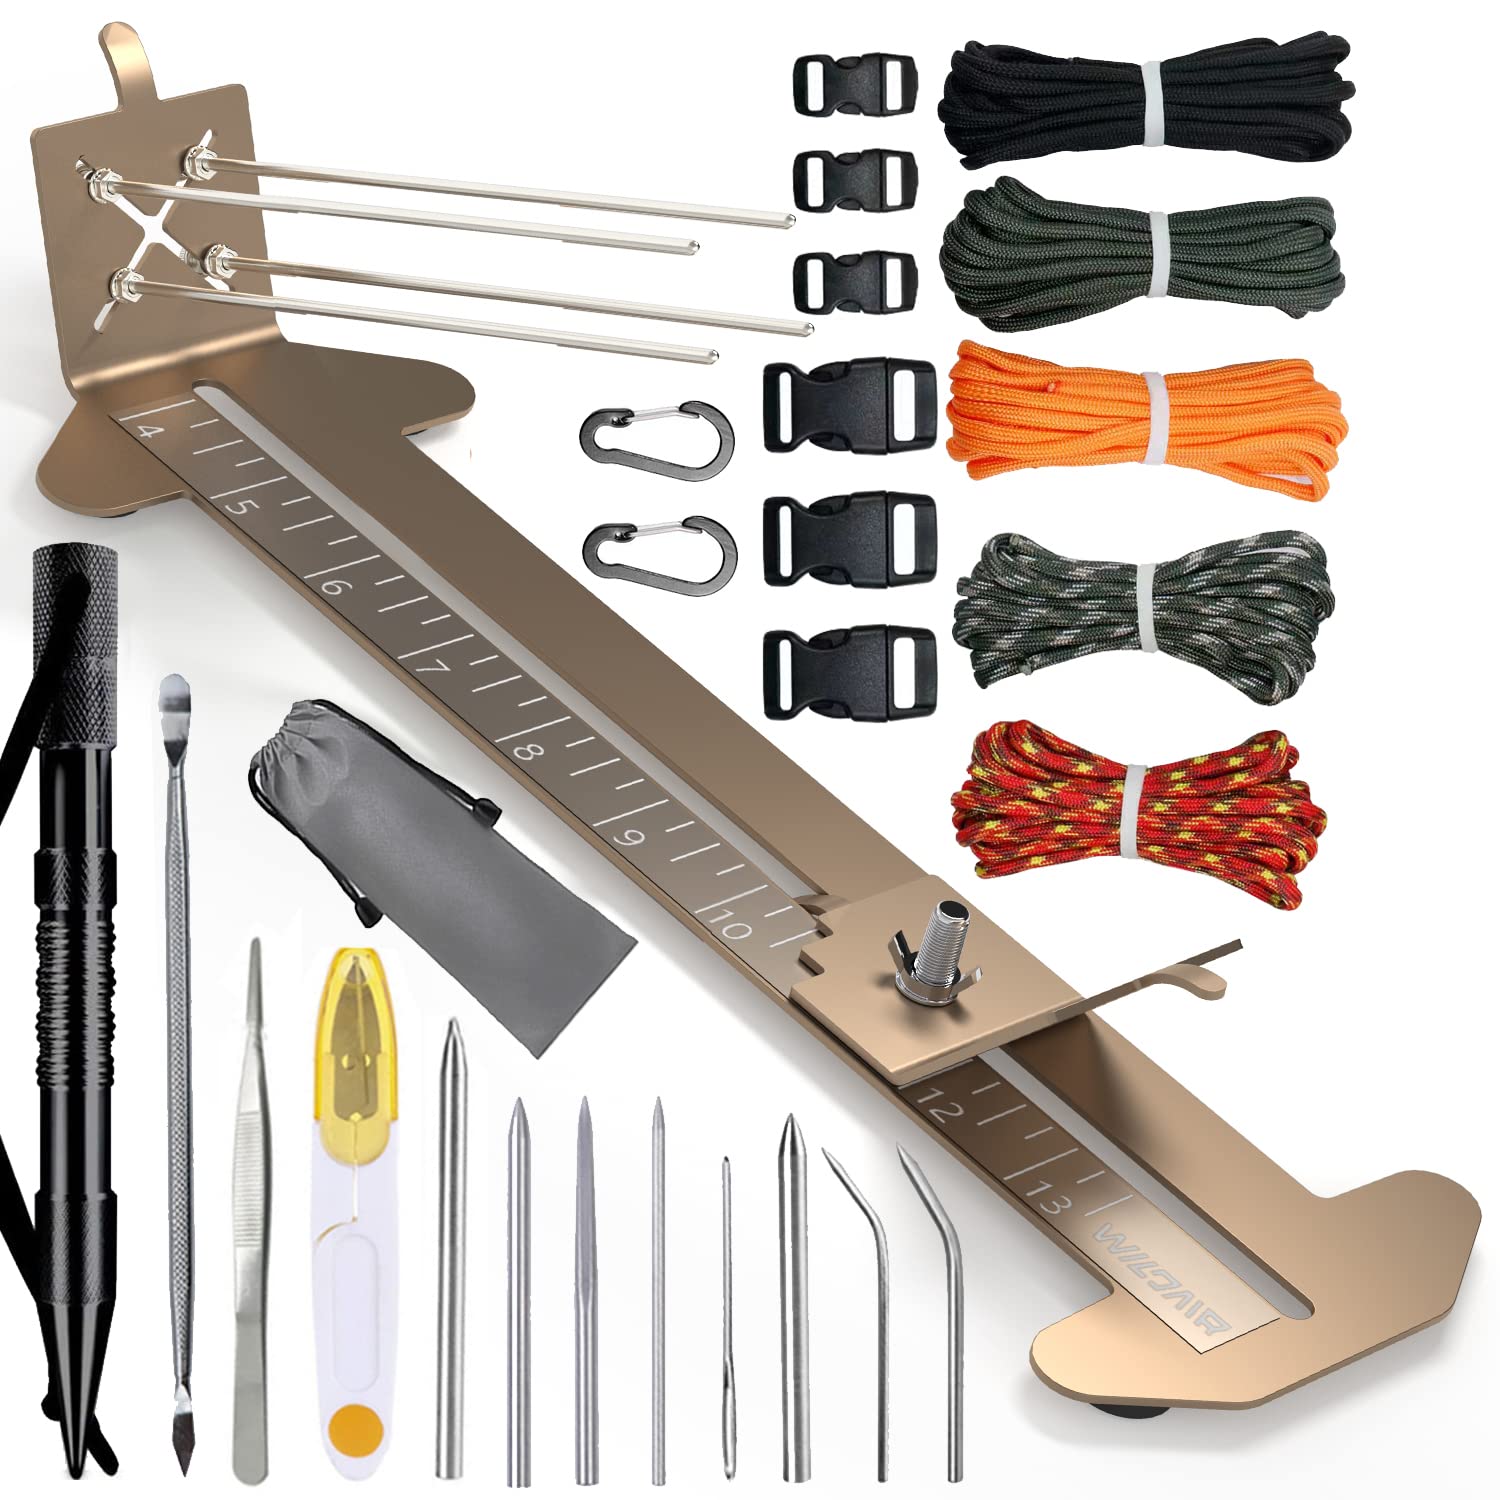 WILDAIR Paracord Bracelet Jig Kit with Knotters Tool Marlin Spike Paracord  FID Set Lacing Needles/Fids for Paracord Work Paracord Tool Kit Adjustable  Length 4 to 13 Paracord Jig Bracelet Maker